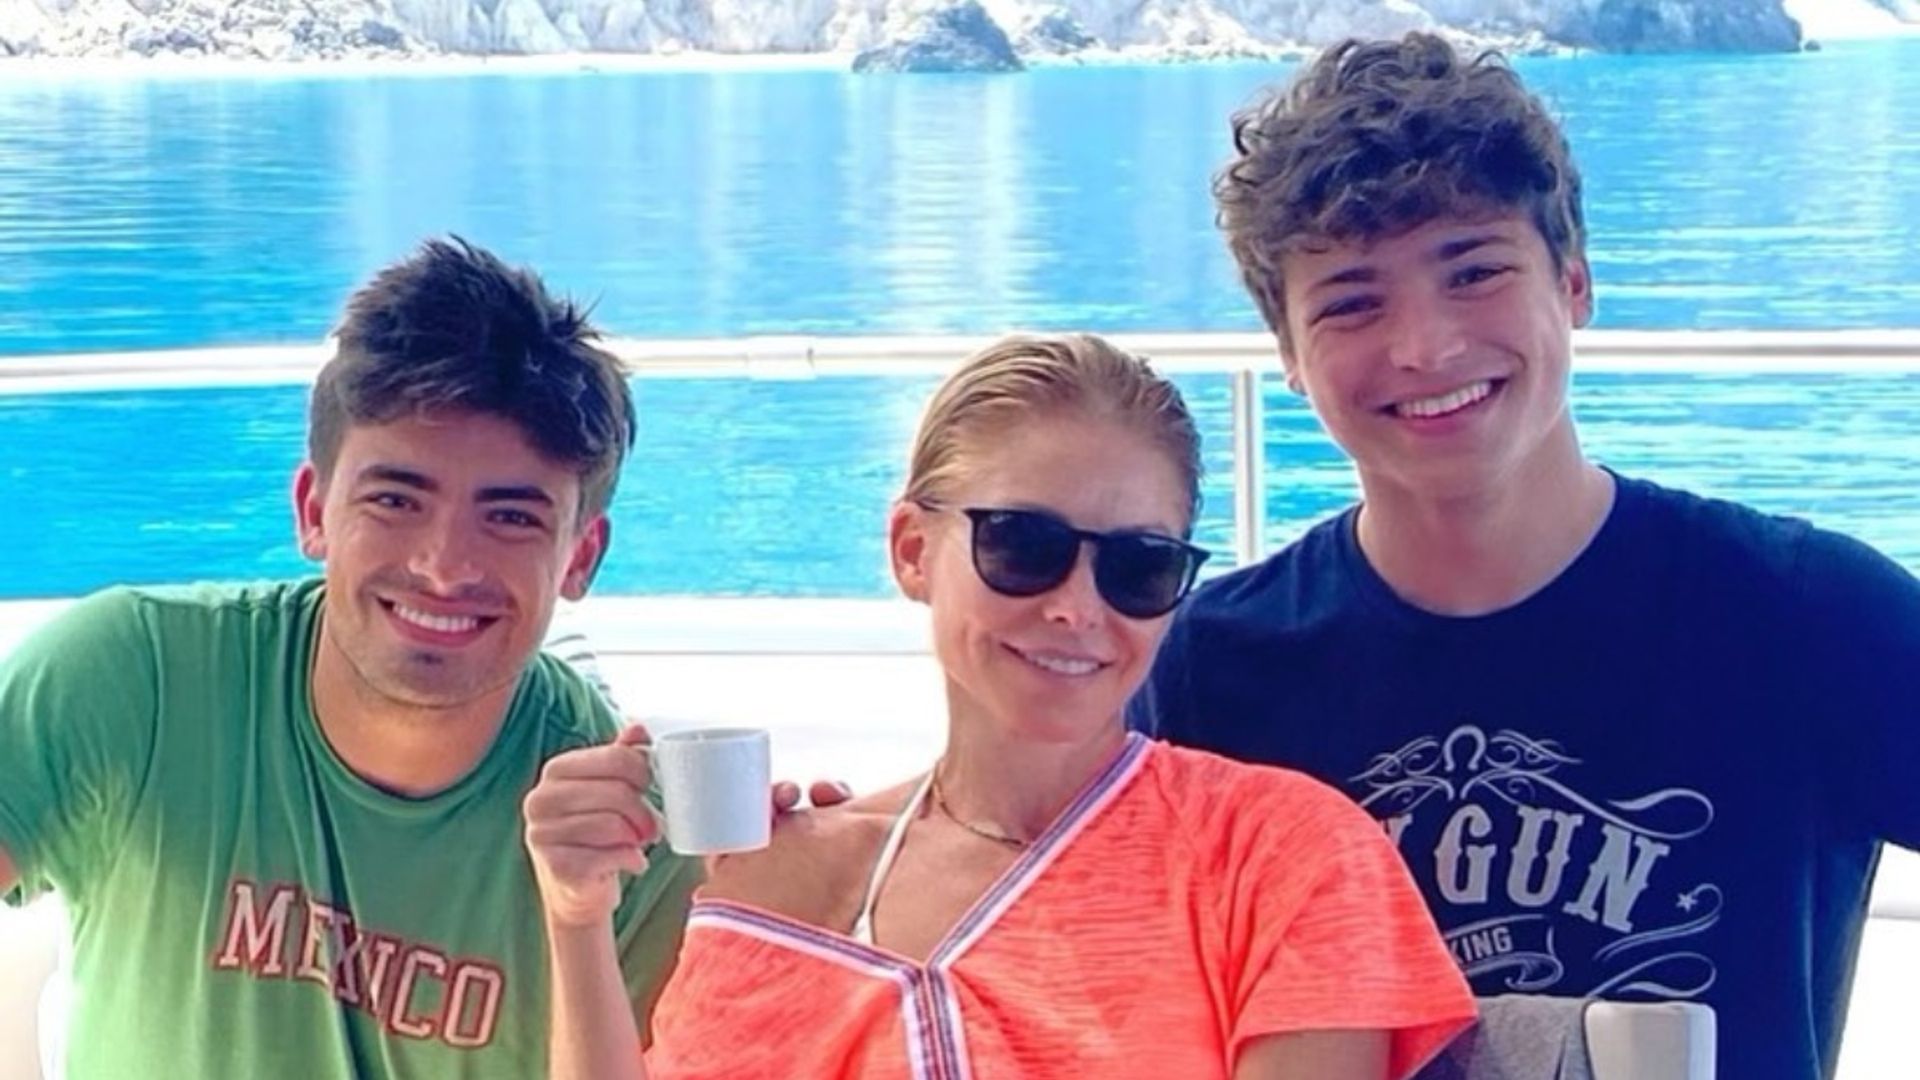 Kelly Ripa reunites with sons Michael and Joaquin for special event - see photos